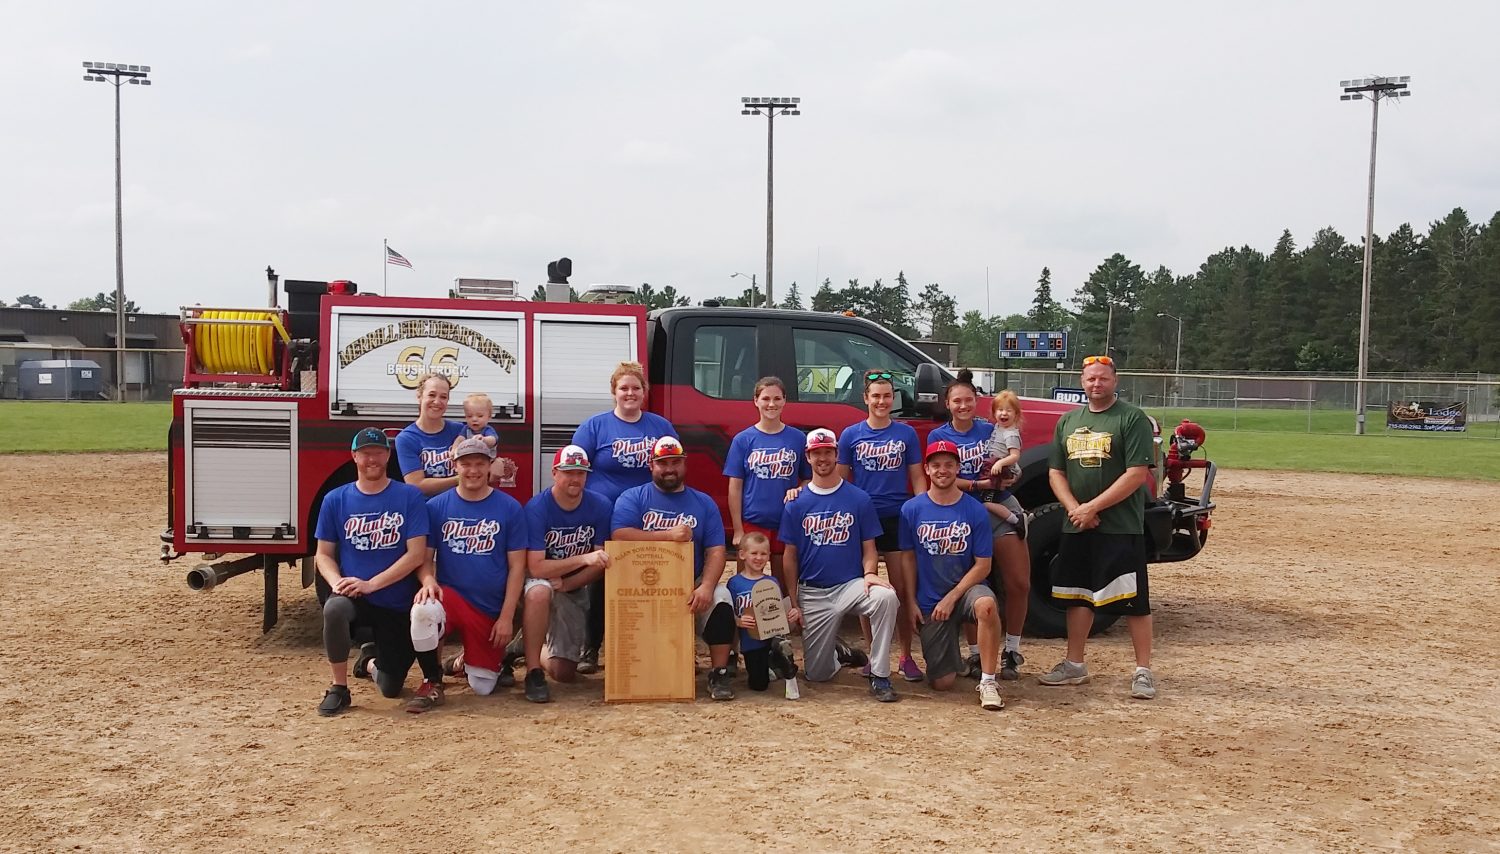 Merrill Fire Department 501(c)(3) Charity Benefit Softball Tournament supports the needs of the Merrill community